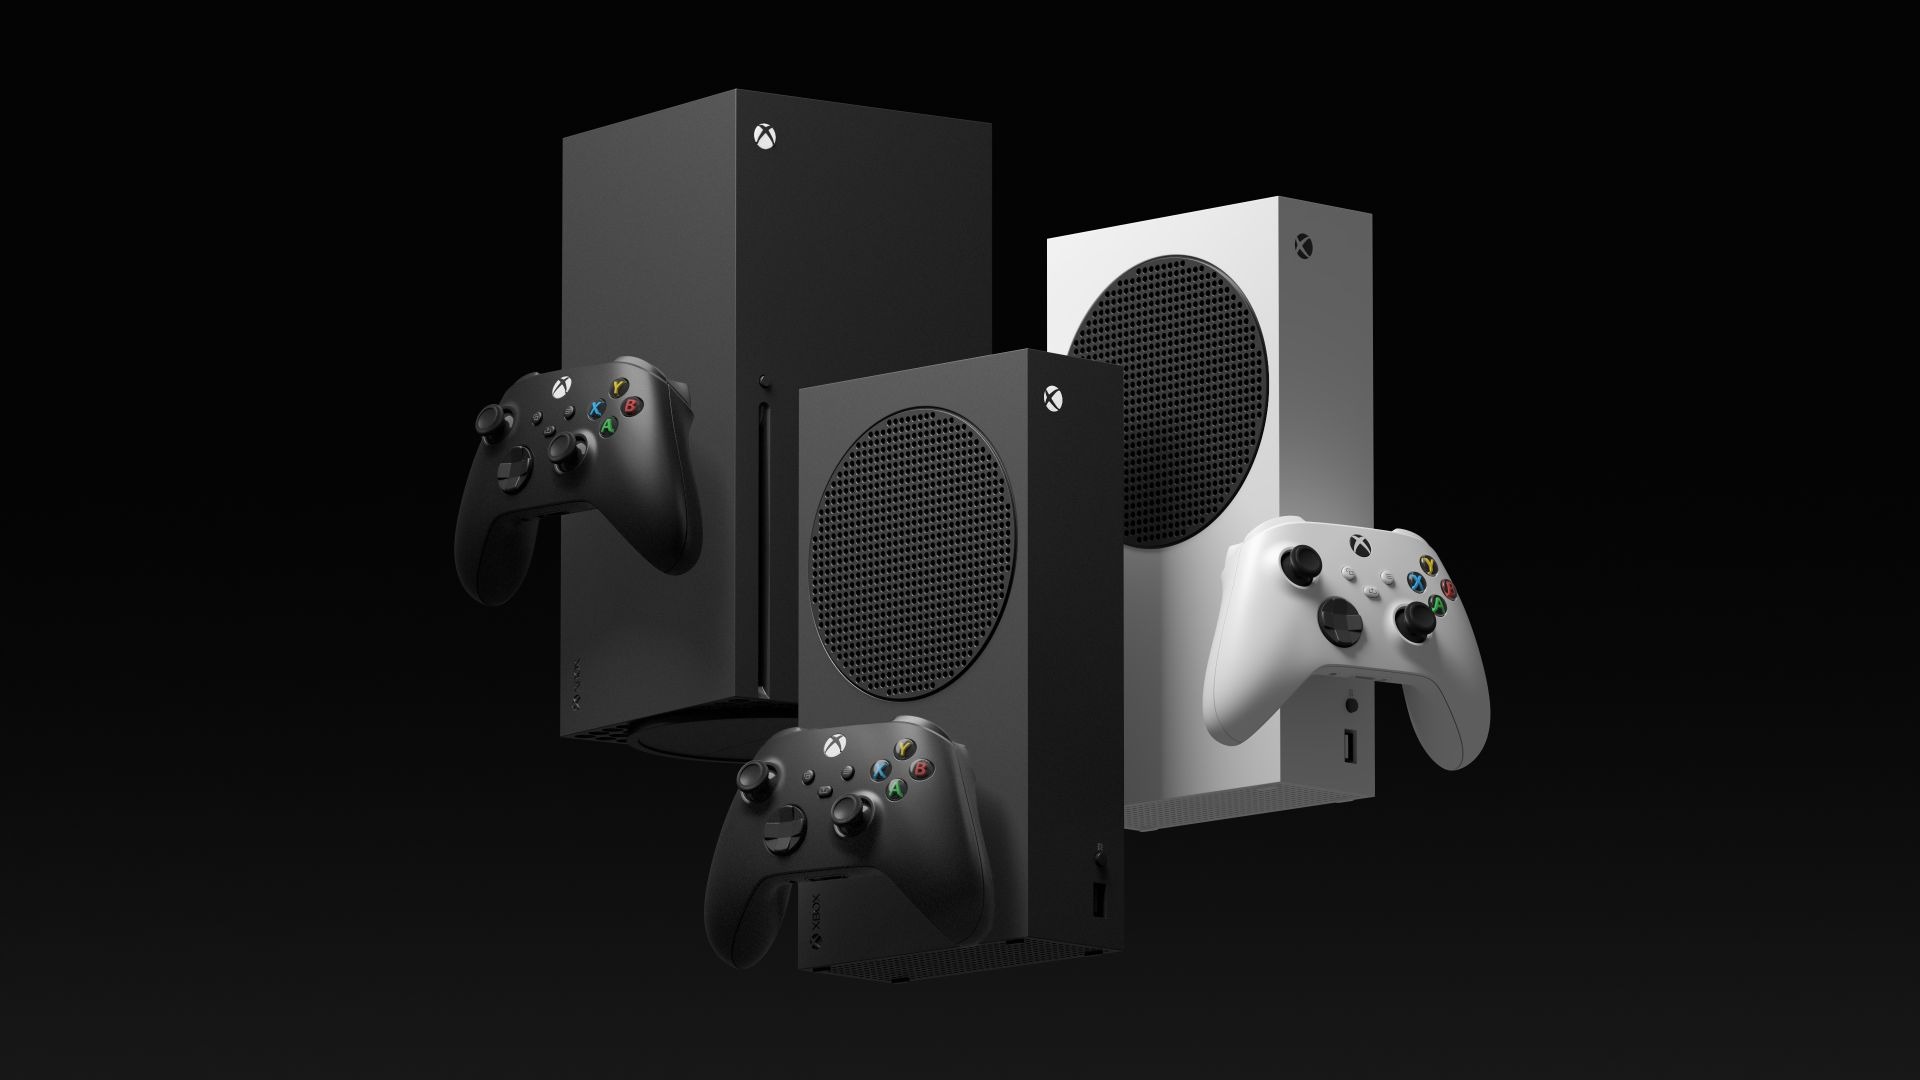 Xbox Series S will be available with 1TB storage in black for $349